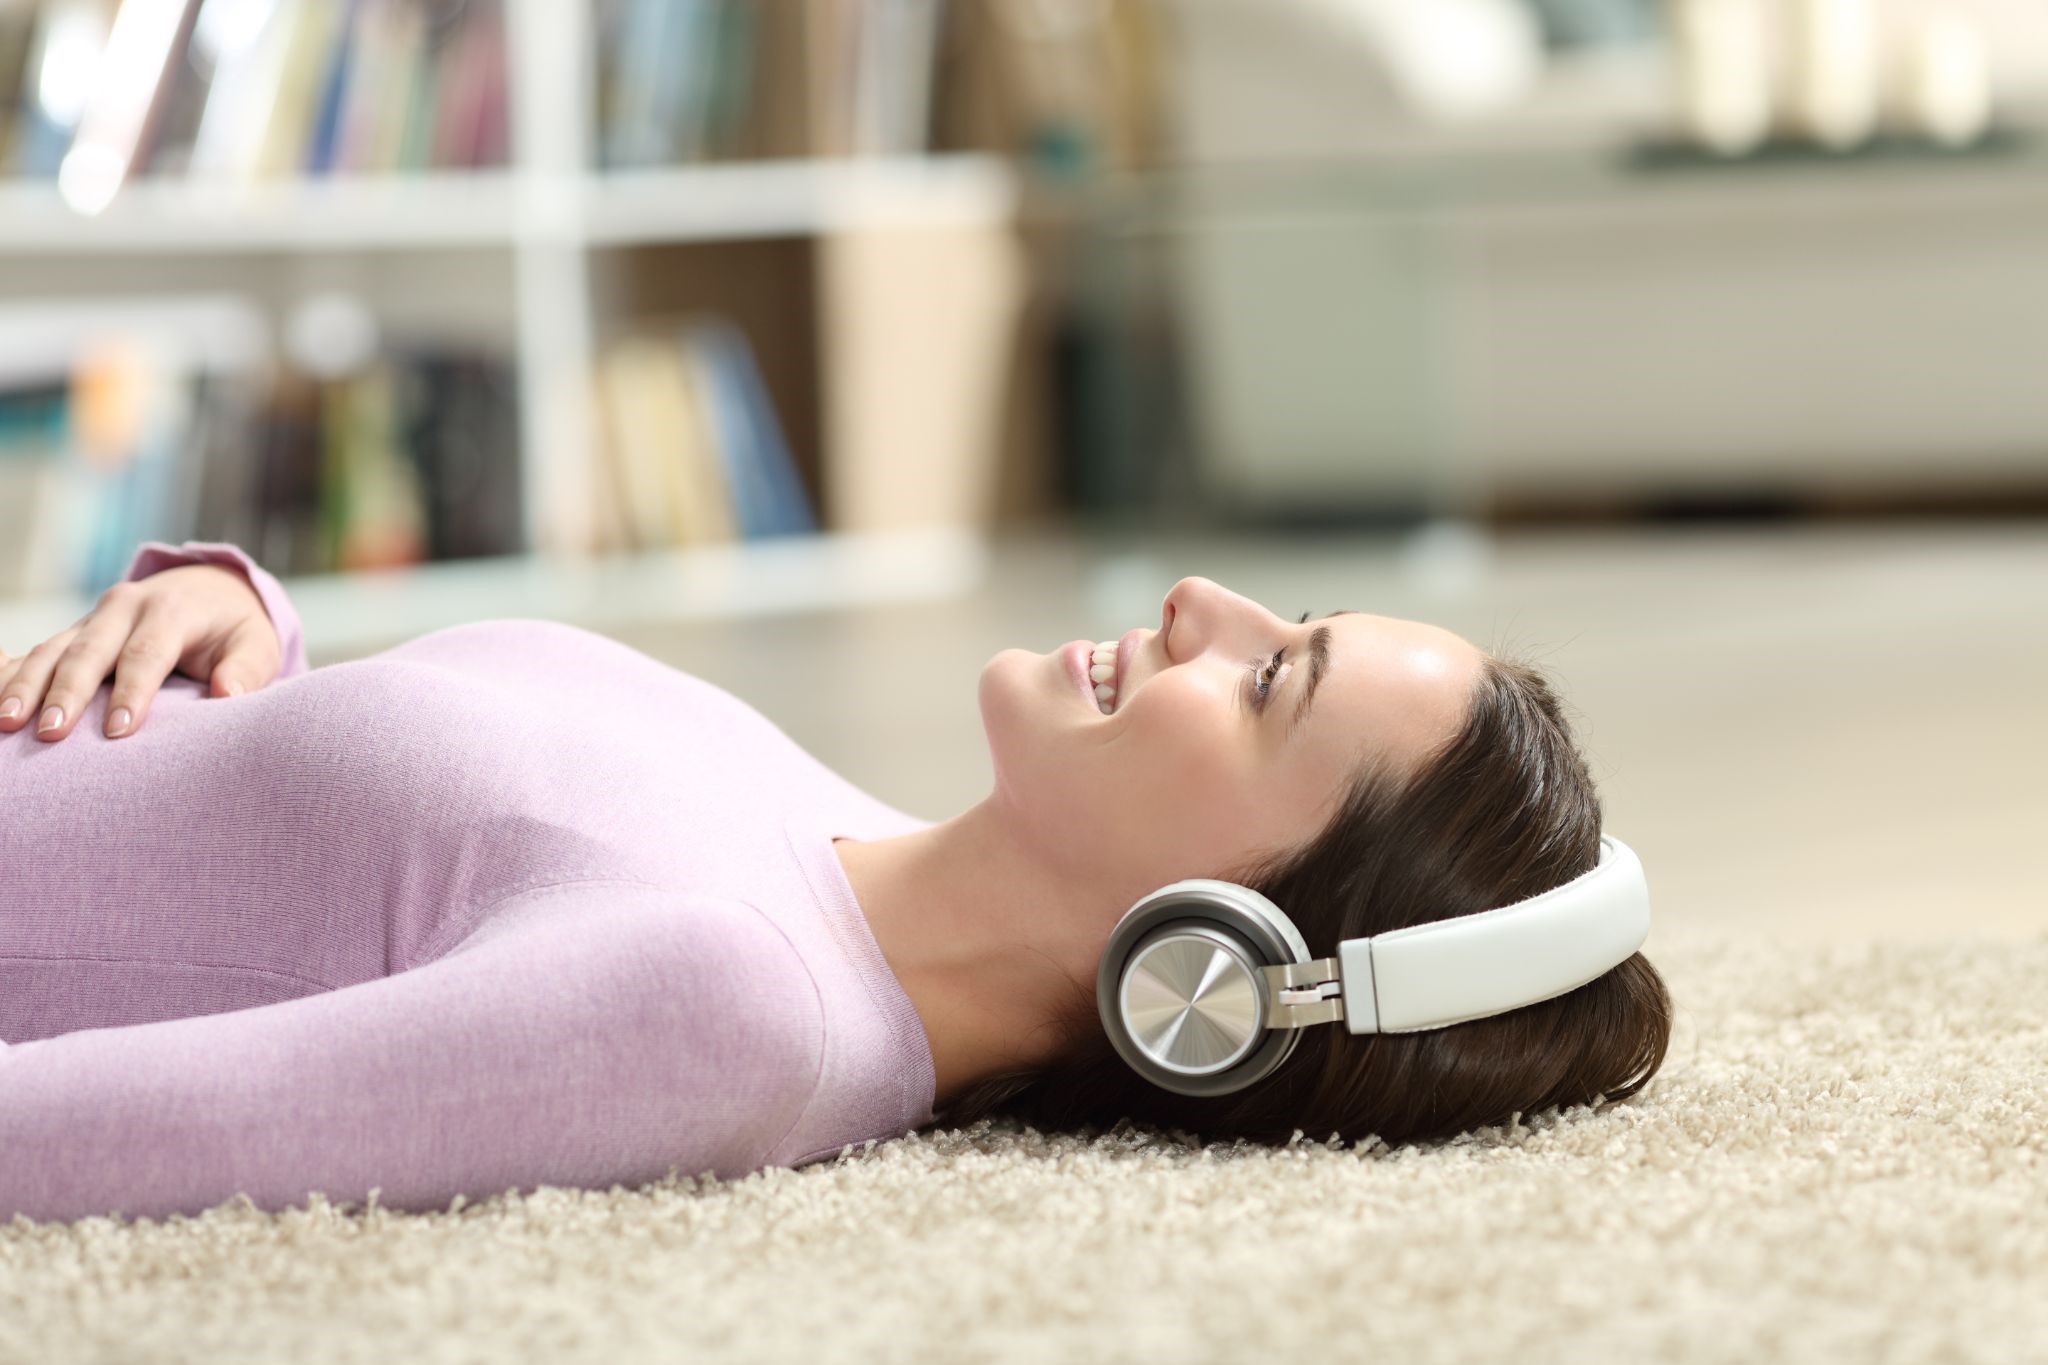 A woman relaxing while listening to music at home.